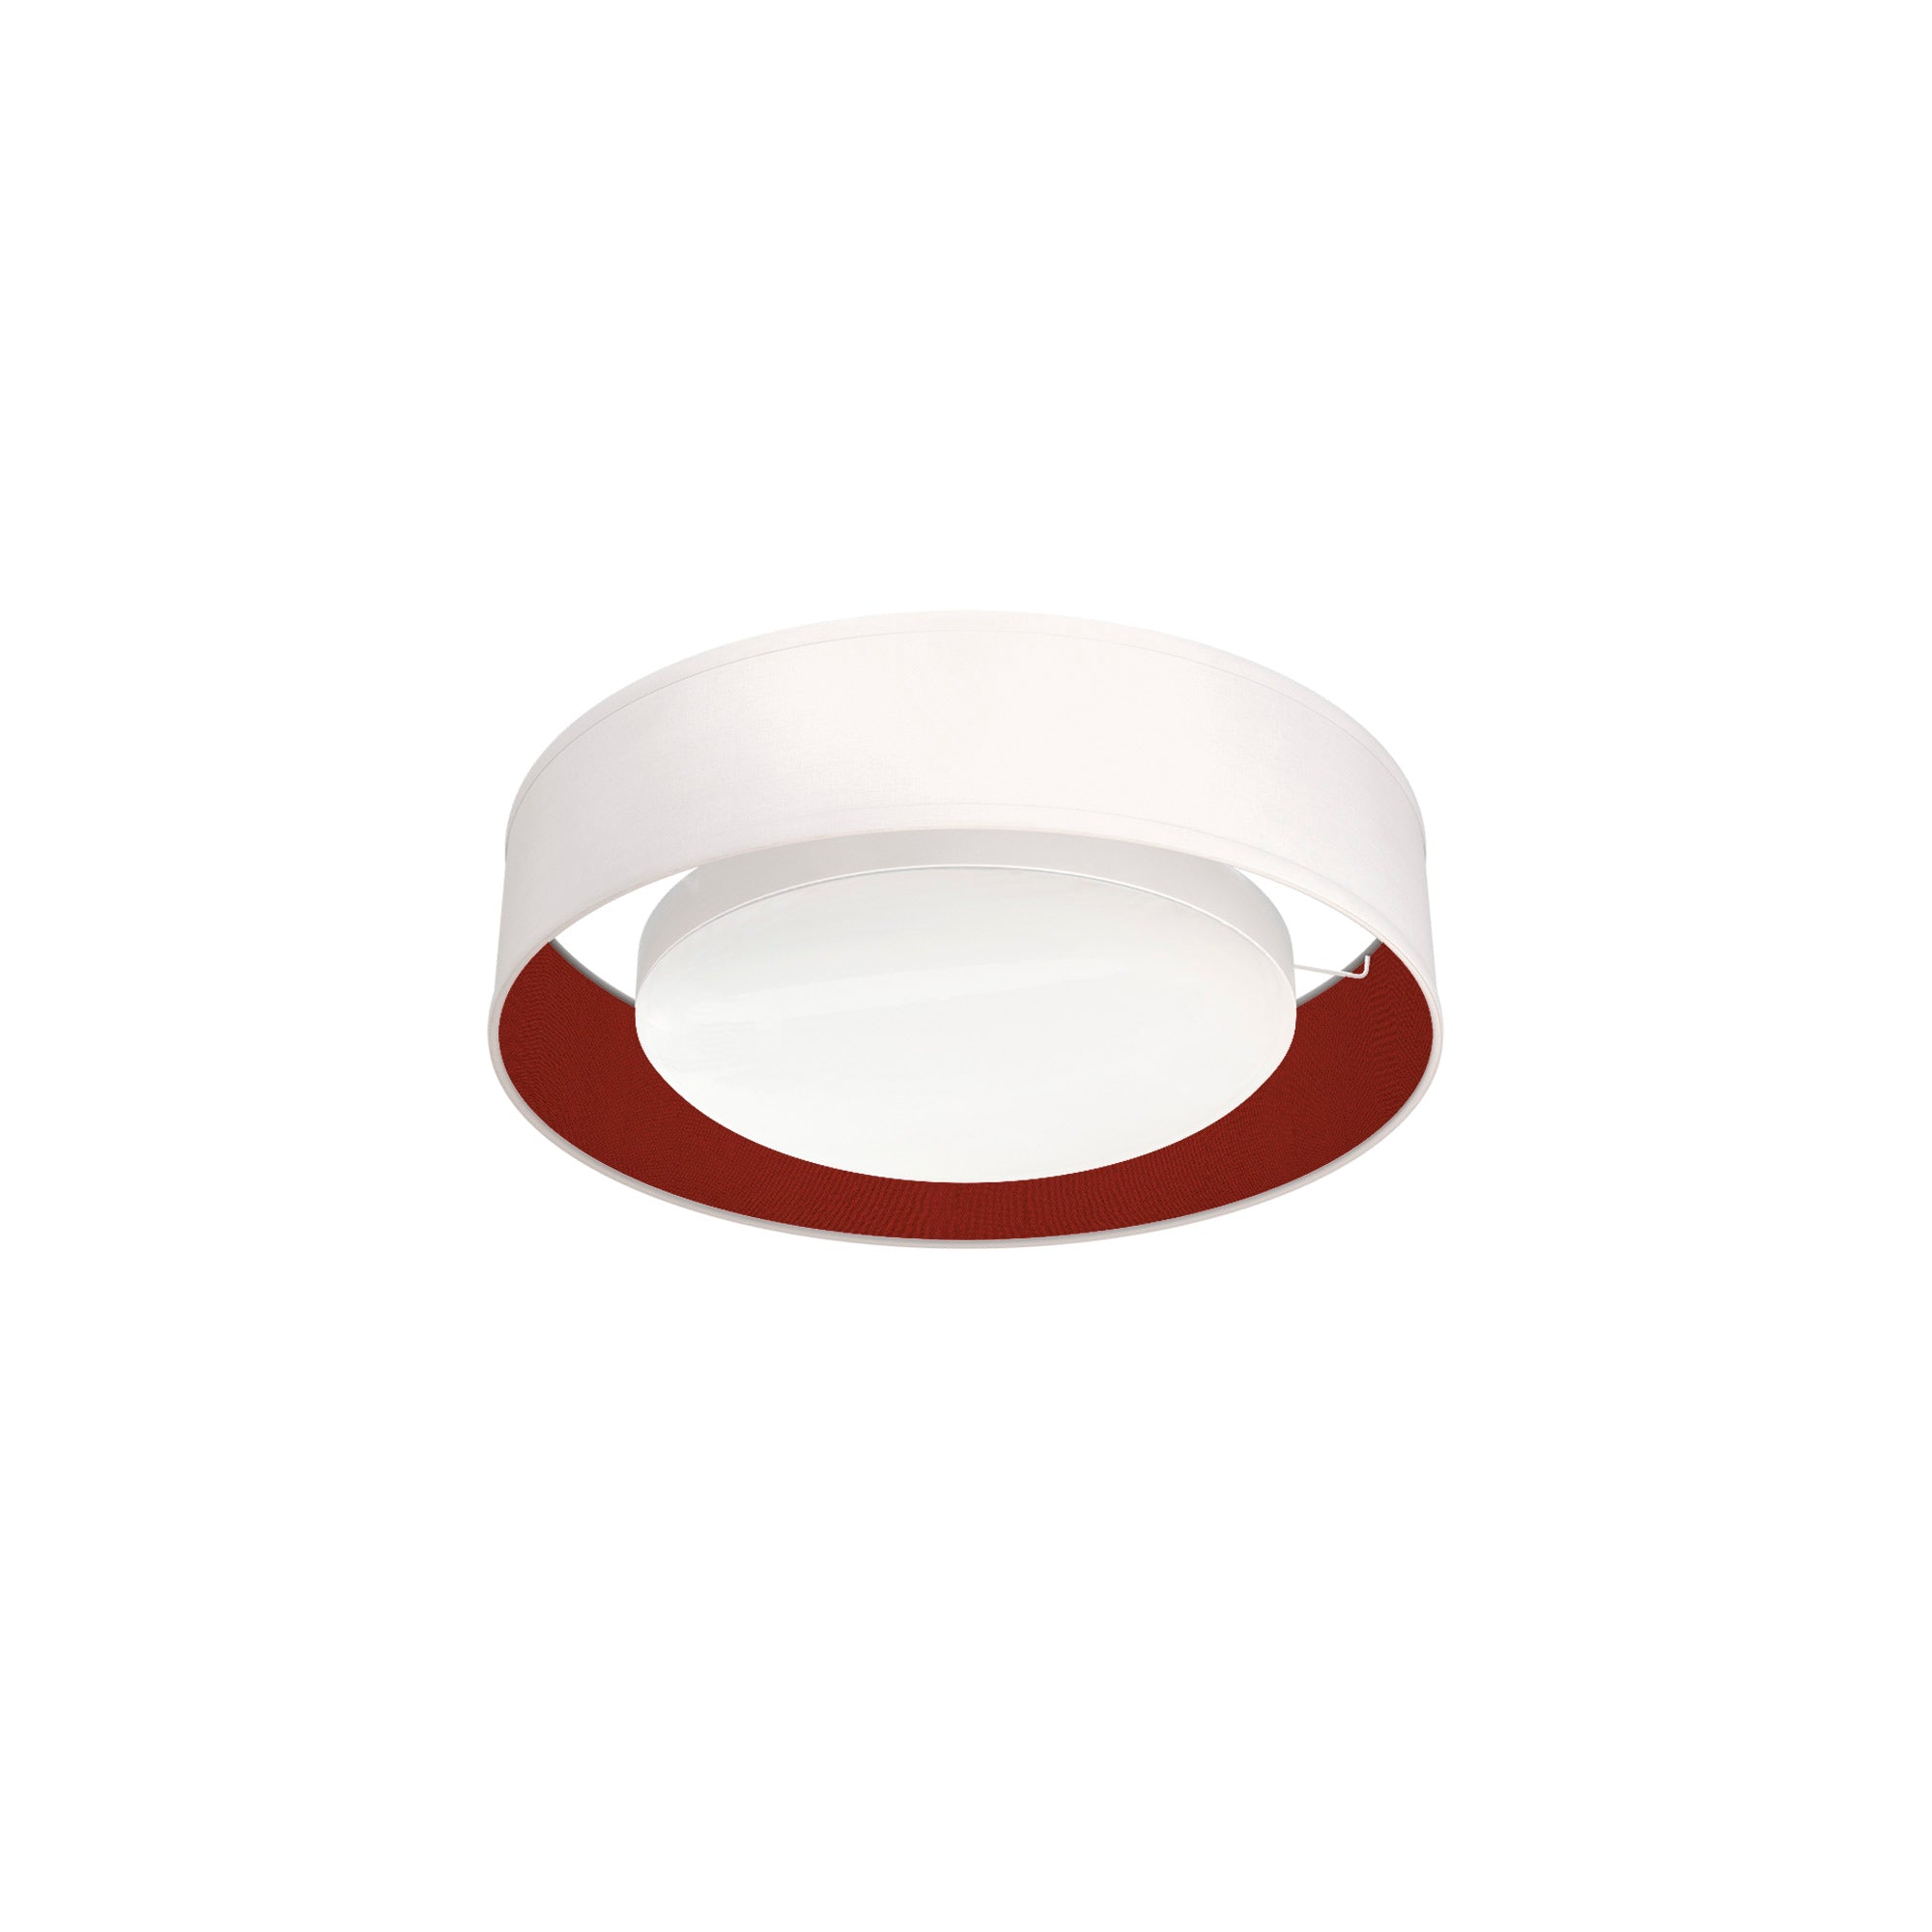 The Vinny Flush Mount from Seascape Fixtures with a silk shade in burgundy color.